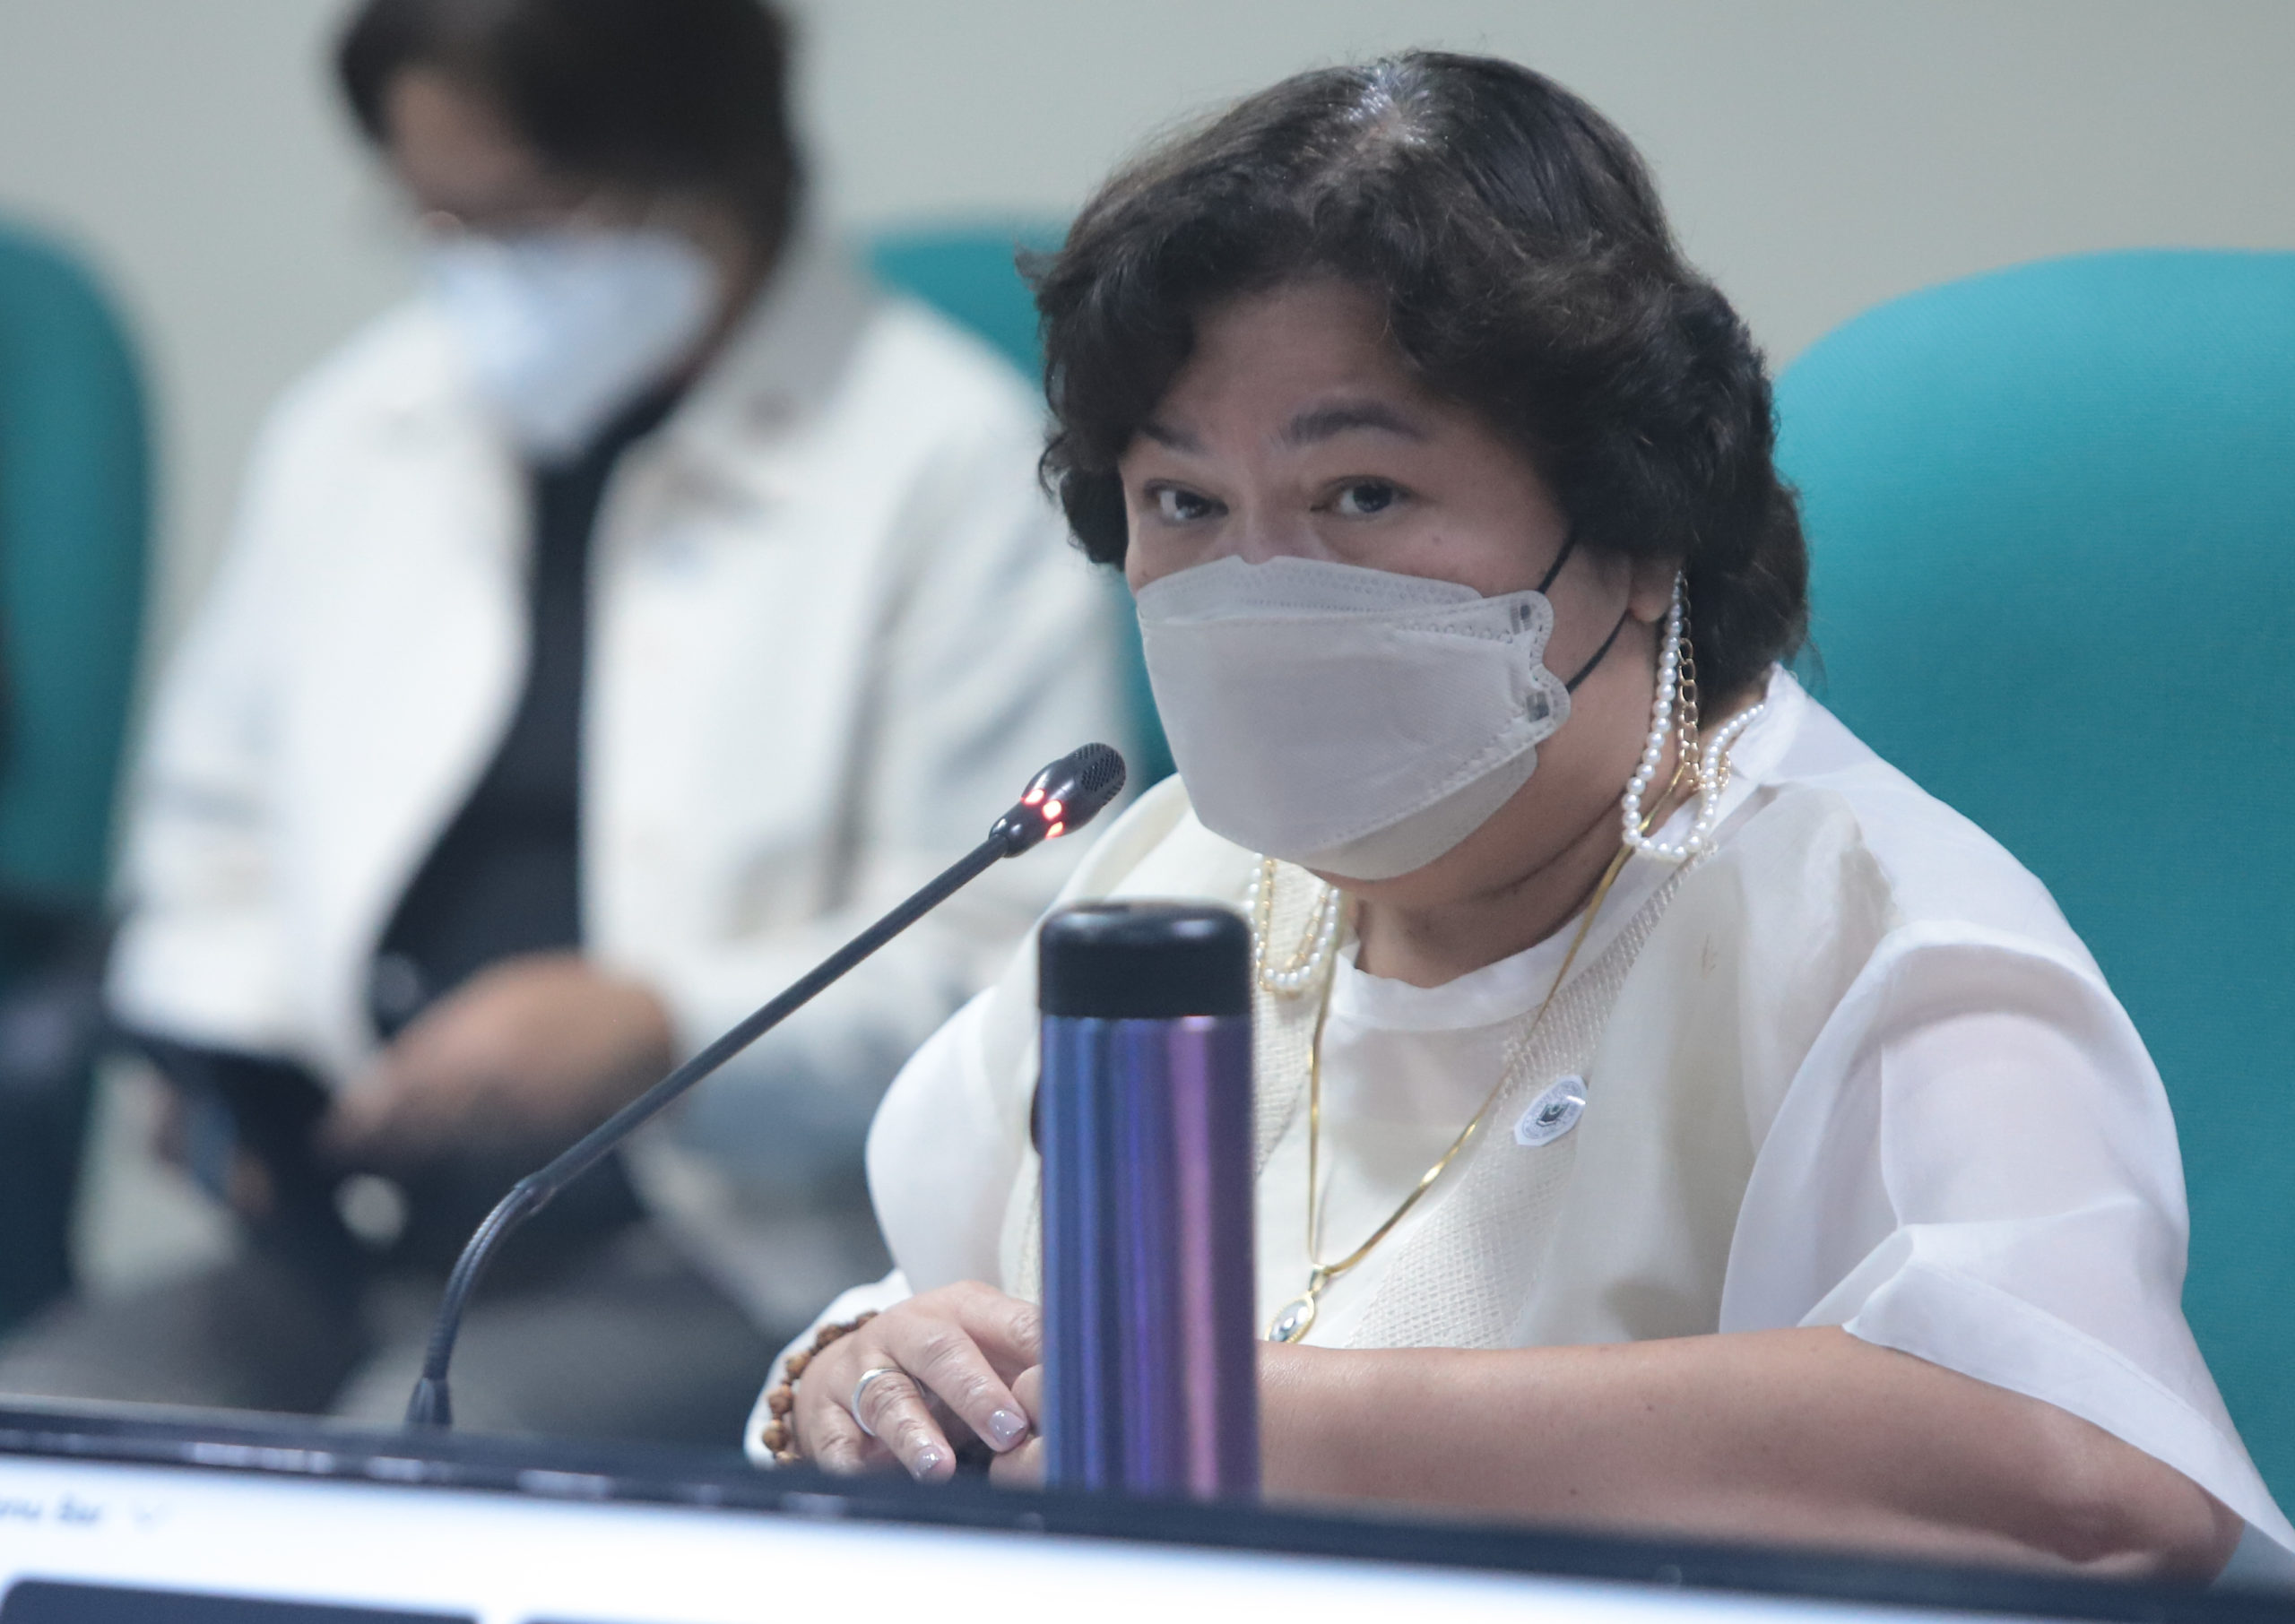 The governments of the Philippines and Hong Kong have vowed to assist the bereaved family of a overseas Filipino worker (OFW) who reportedly fell to her death while cleaning the window of her employer’s apartment, Migrant Workers Secretary Susan Ople said on Friday. 